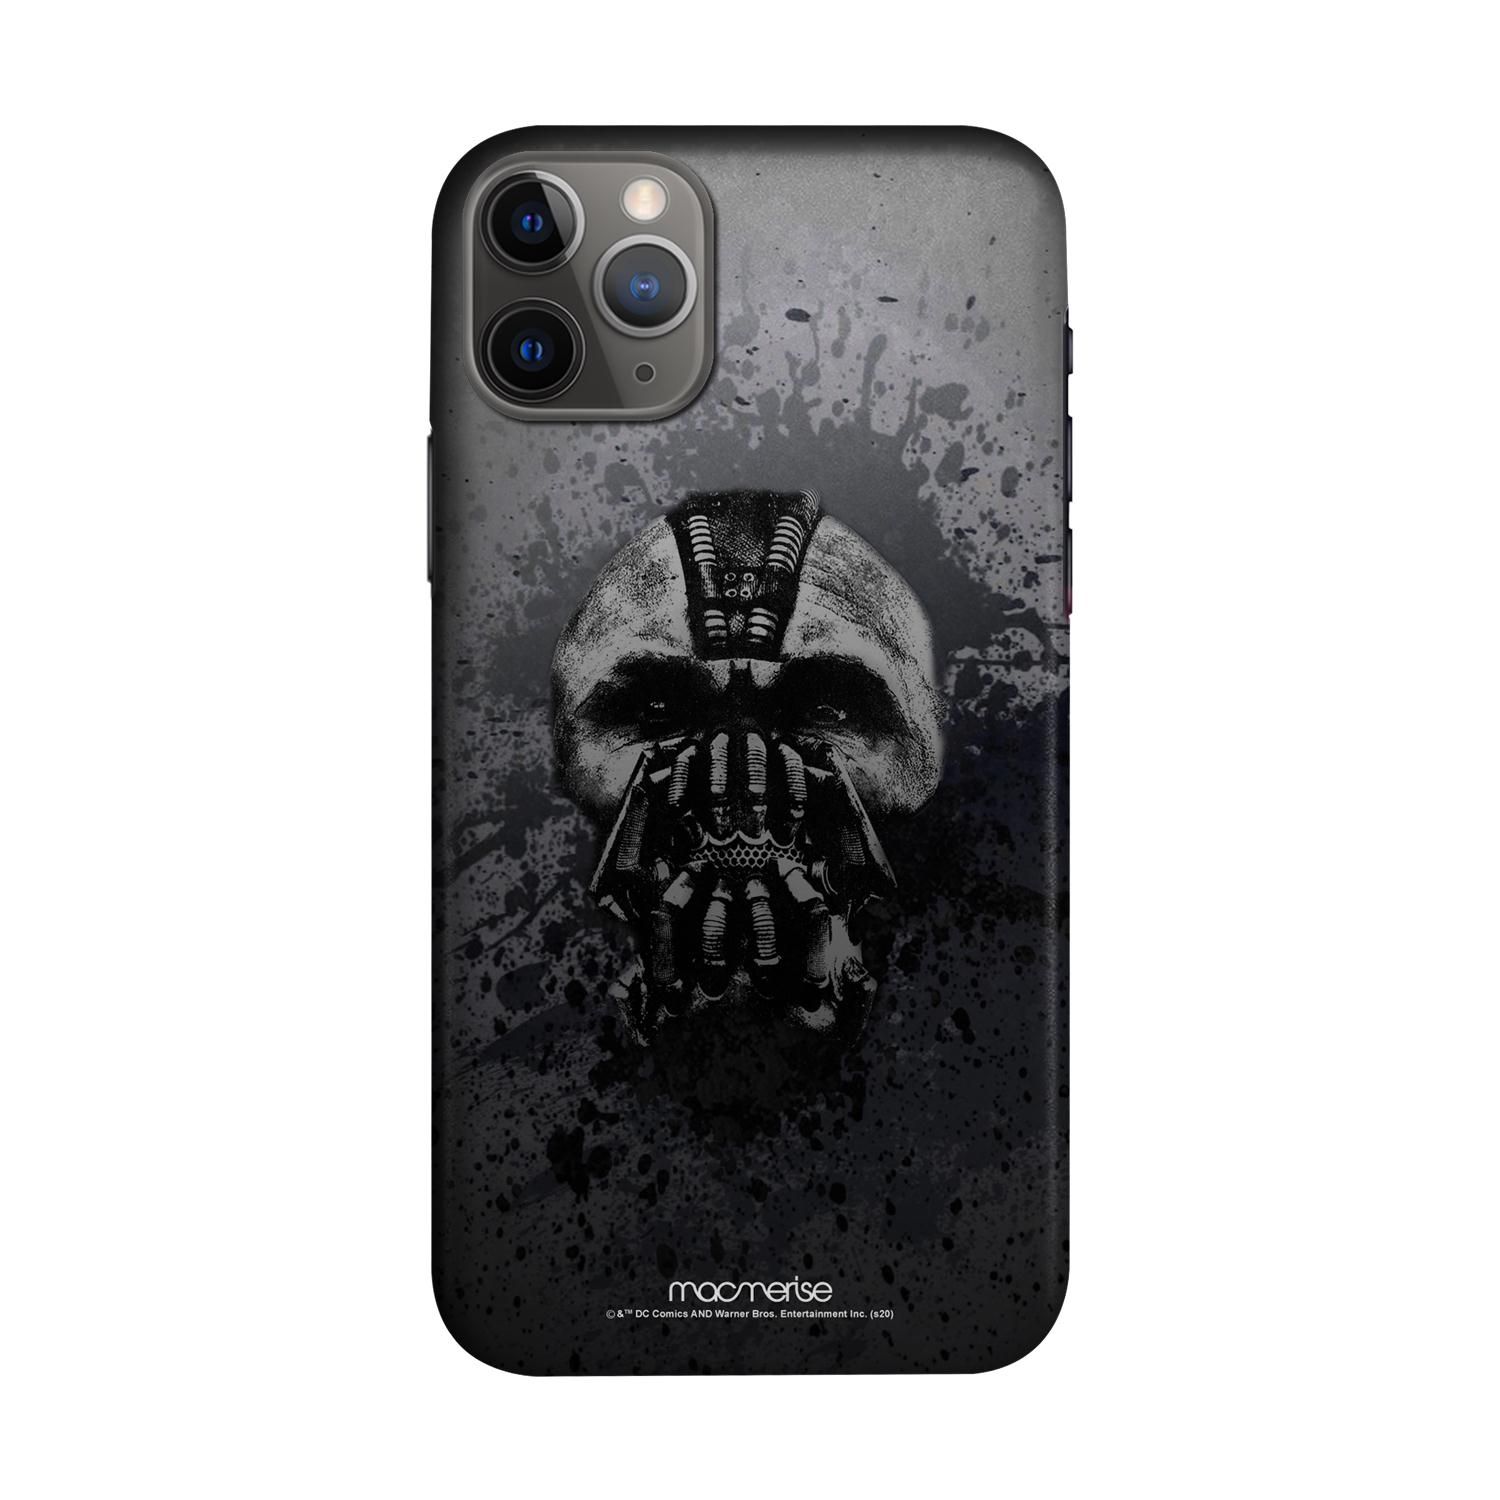 Buy Bane is Watching - Sleek Phone Case for iPhone 11 Pro Max Online